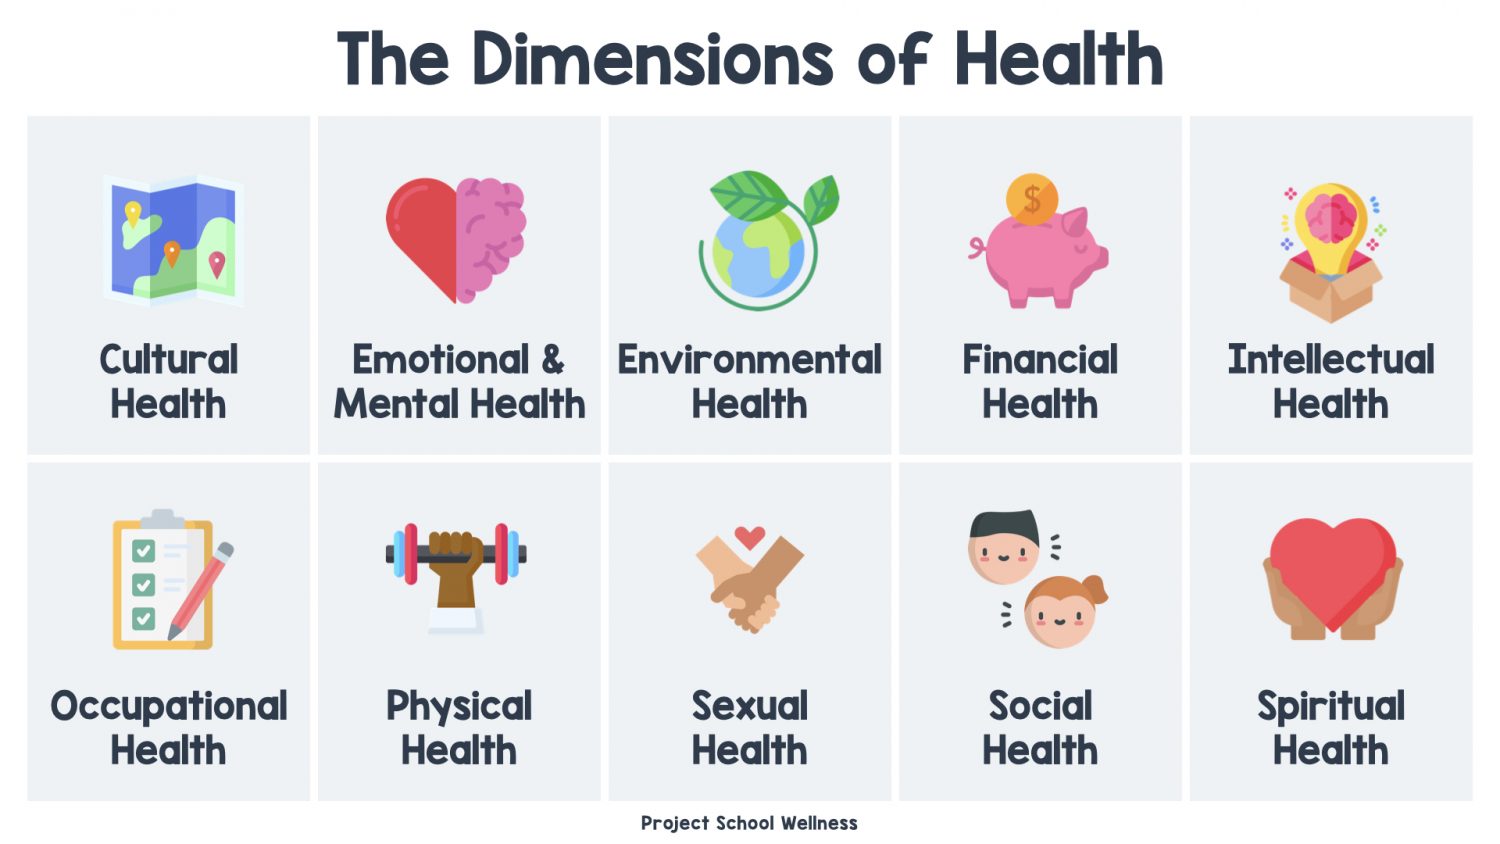 The Dimensions of Health - the Ultimate Guide for Teaching Health - The Ultimate Guide for Teaching Health, everything you need to know about teaching comprehension, skills-based health education. - A Project School Wellness skills-based health resources. Download free advocacy lesson plans, a skills-based health lesson planning template, and health education scope and sequence template